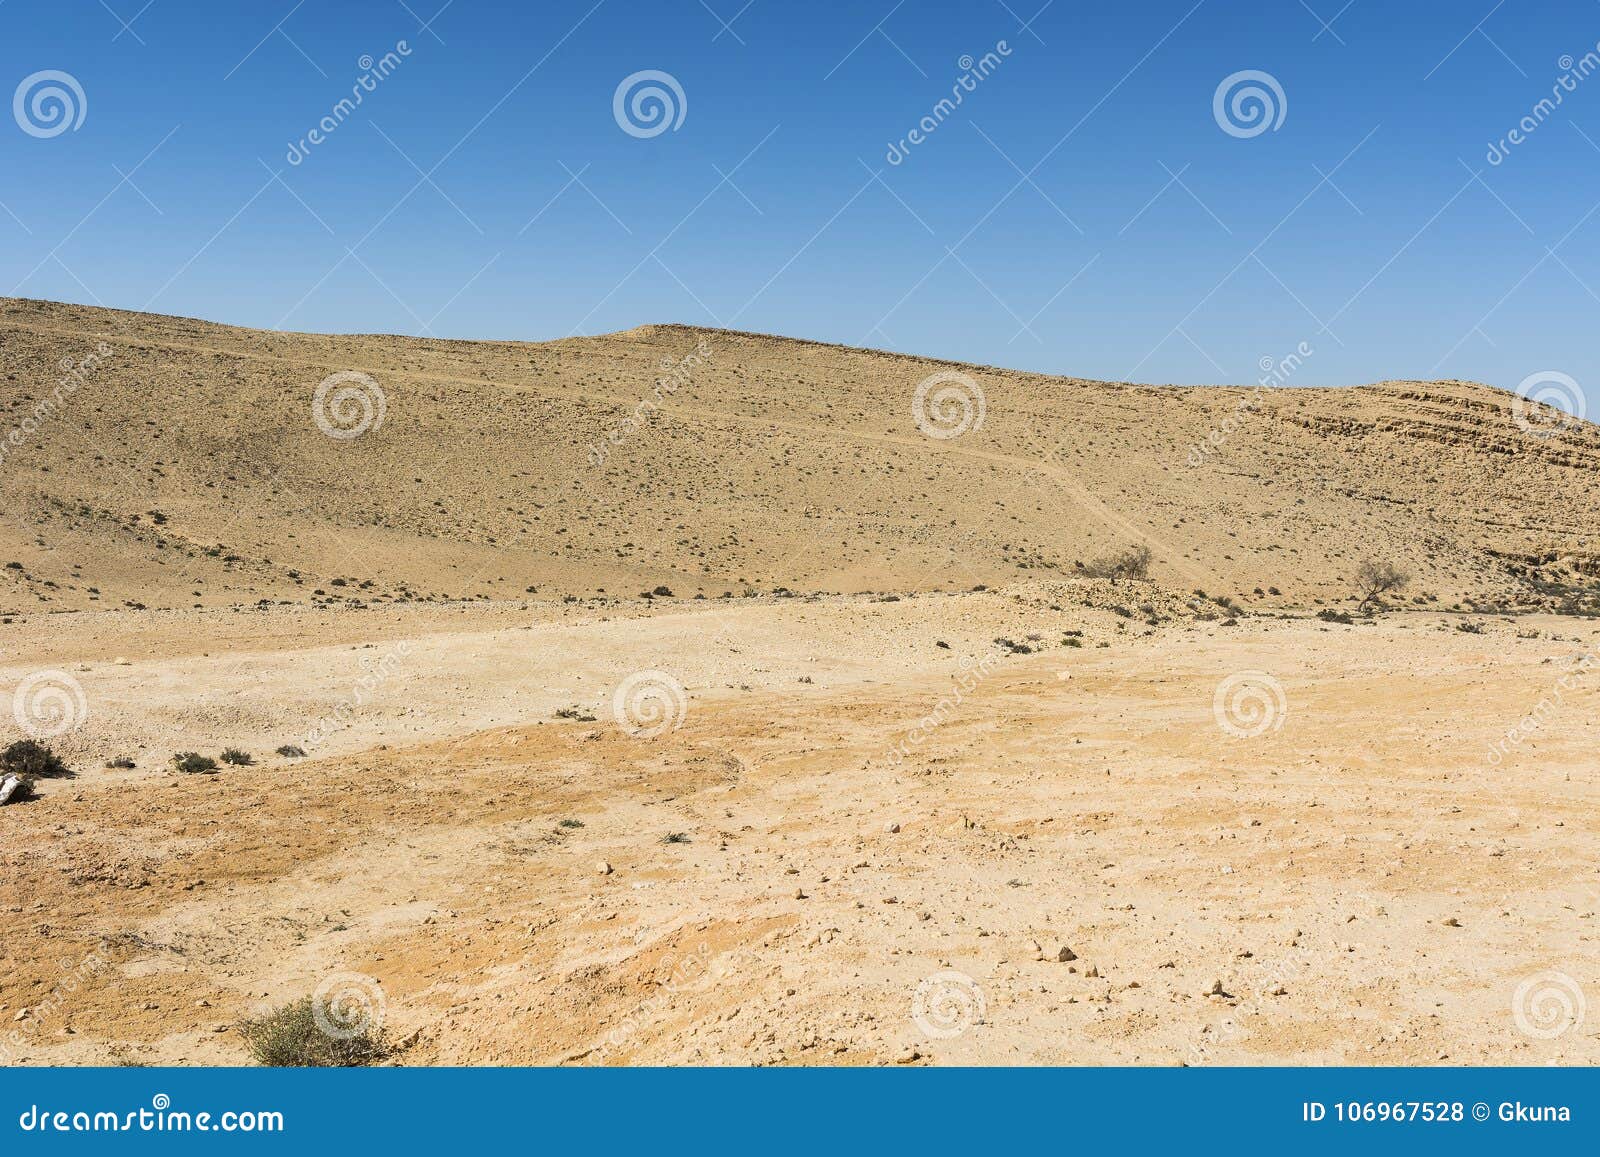 Wadis and Craters of Israel Desert. Stock Photo - Image of land, hiking